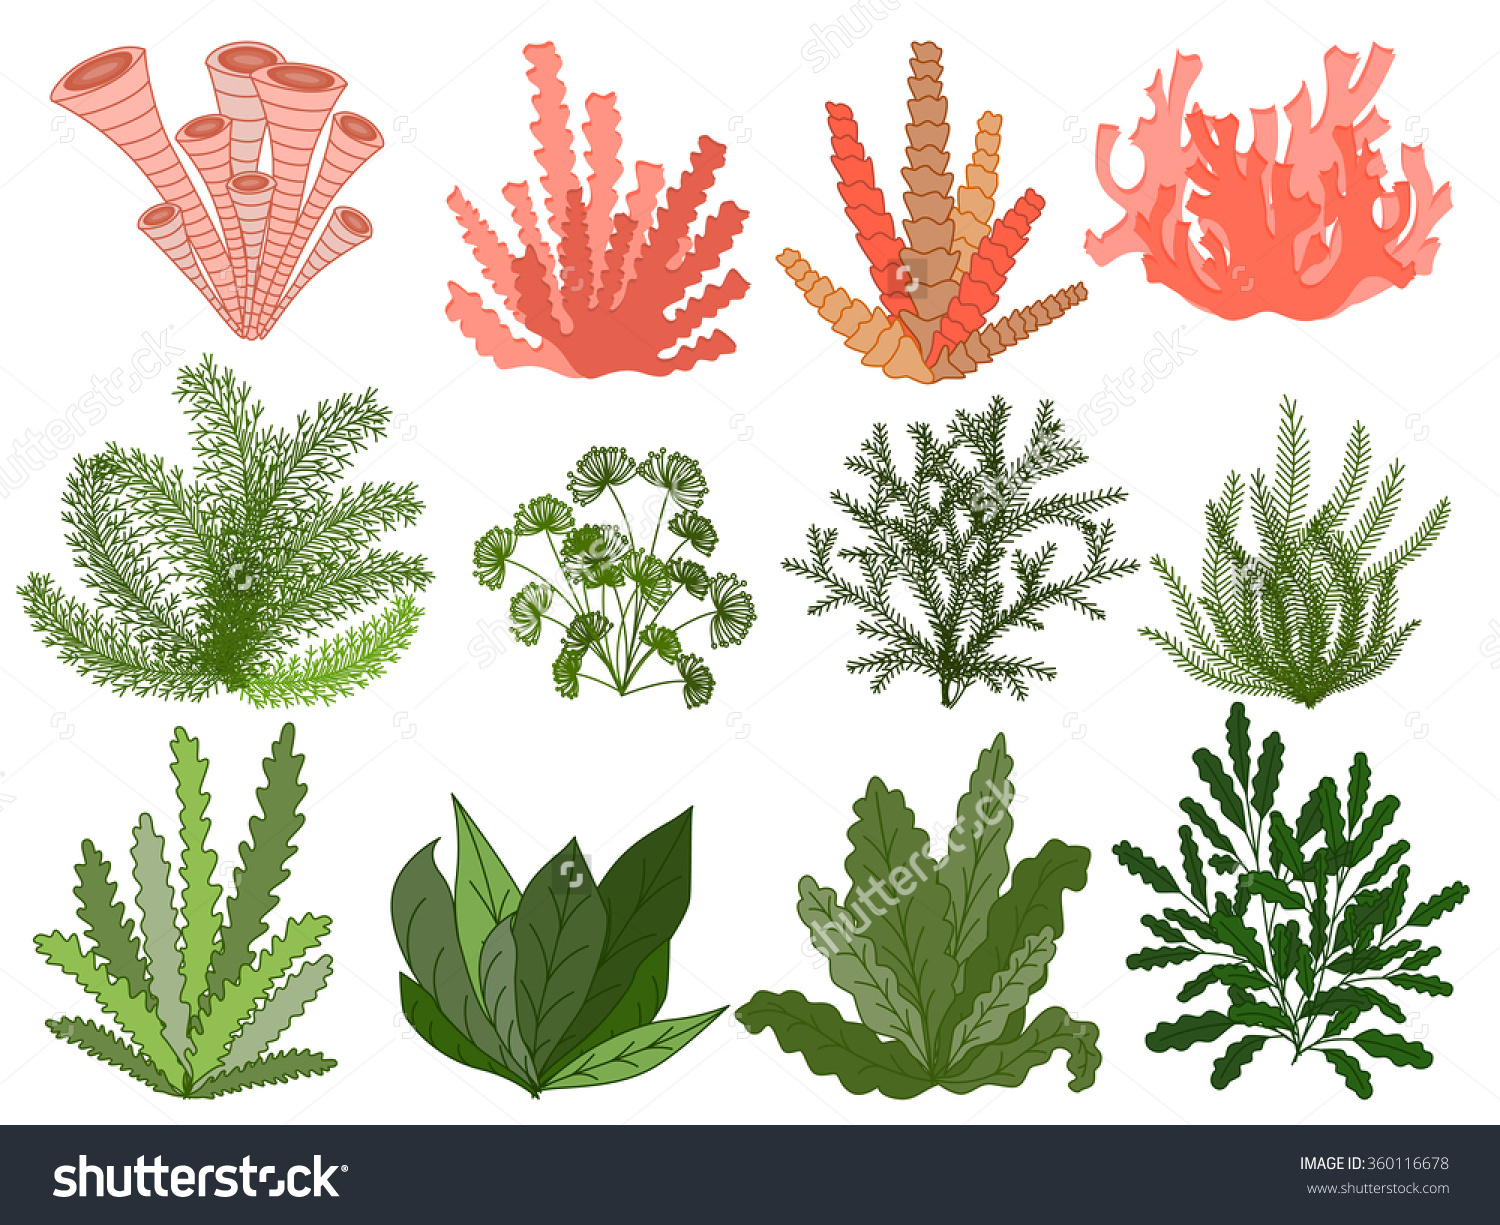 Plants drawing at getdrawings com free for.